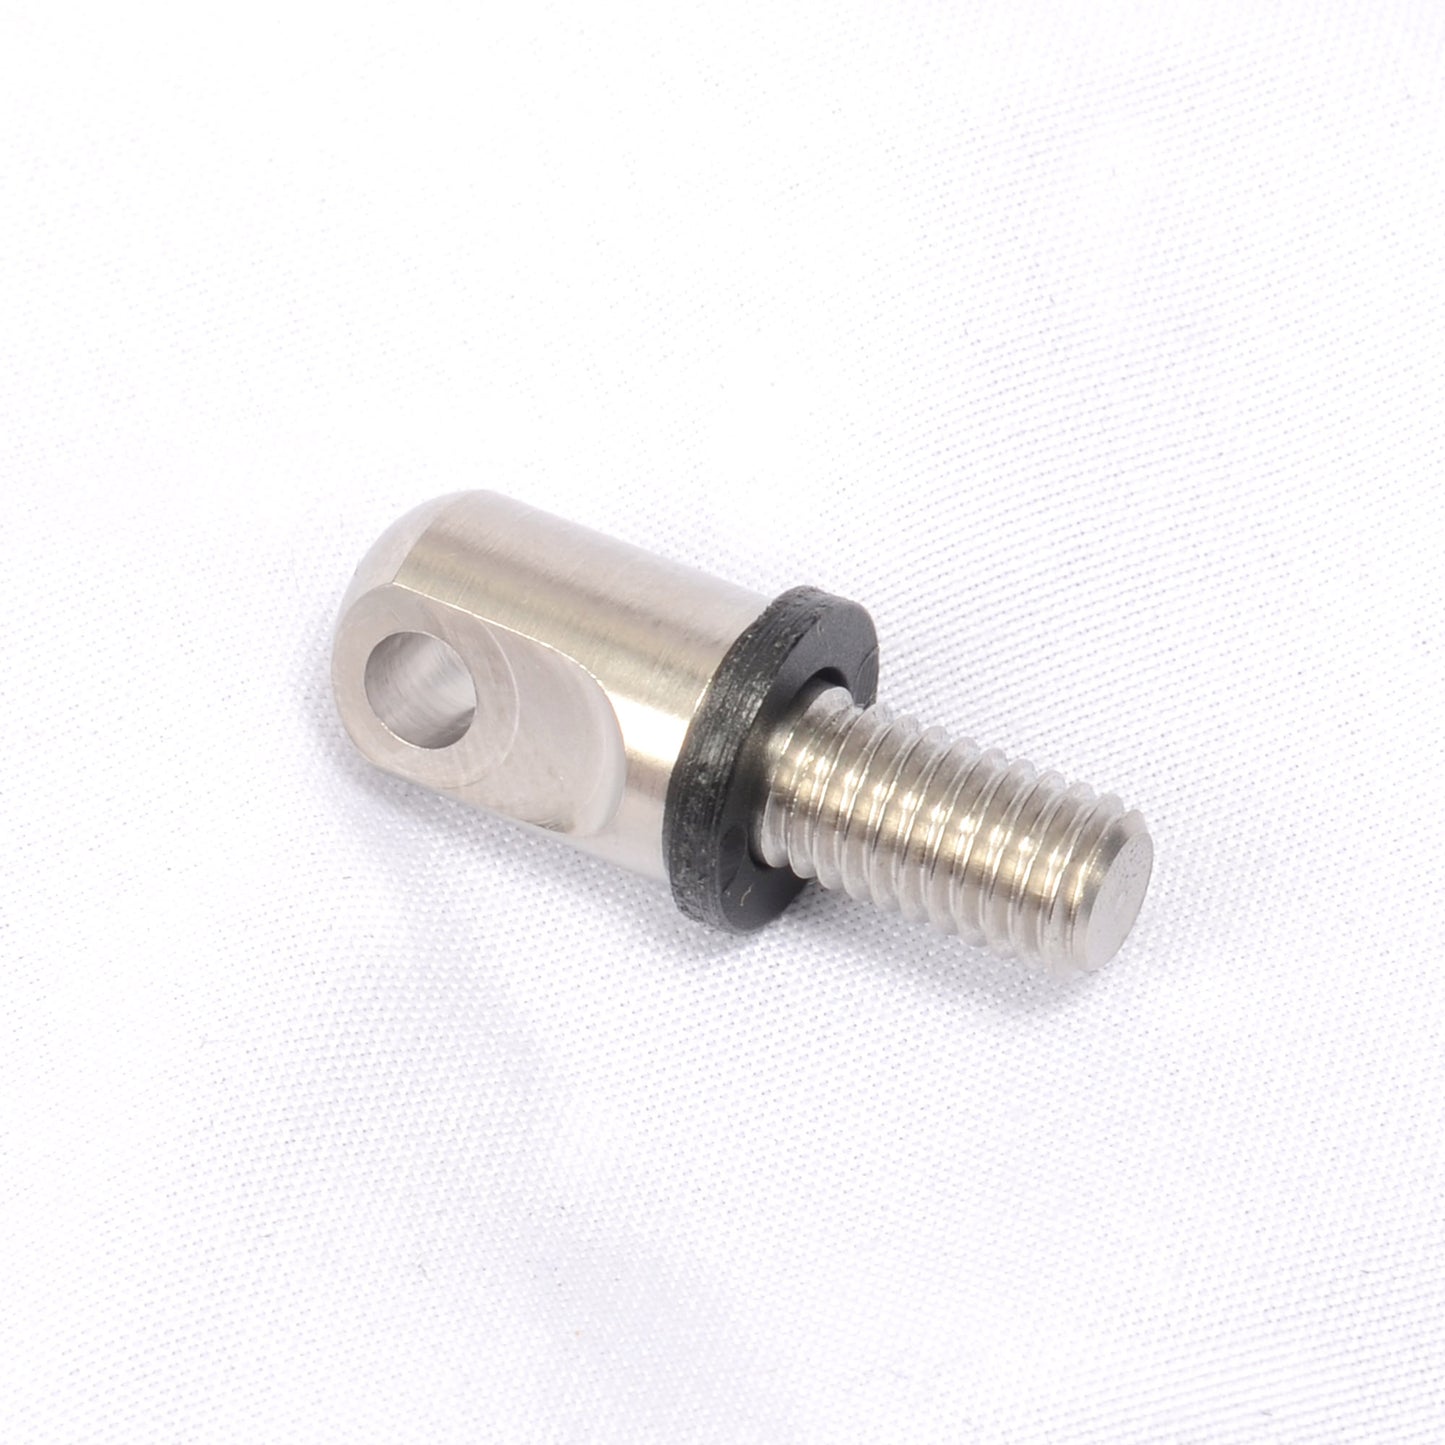 HW100 front QD Stud. Stainless Steel.